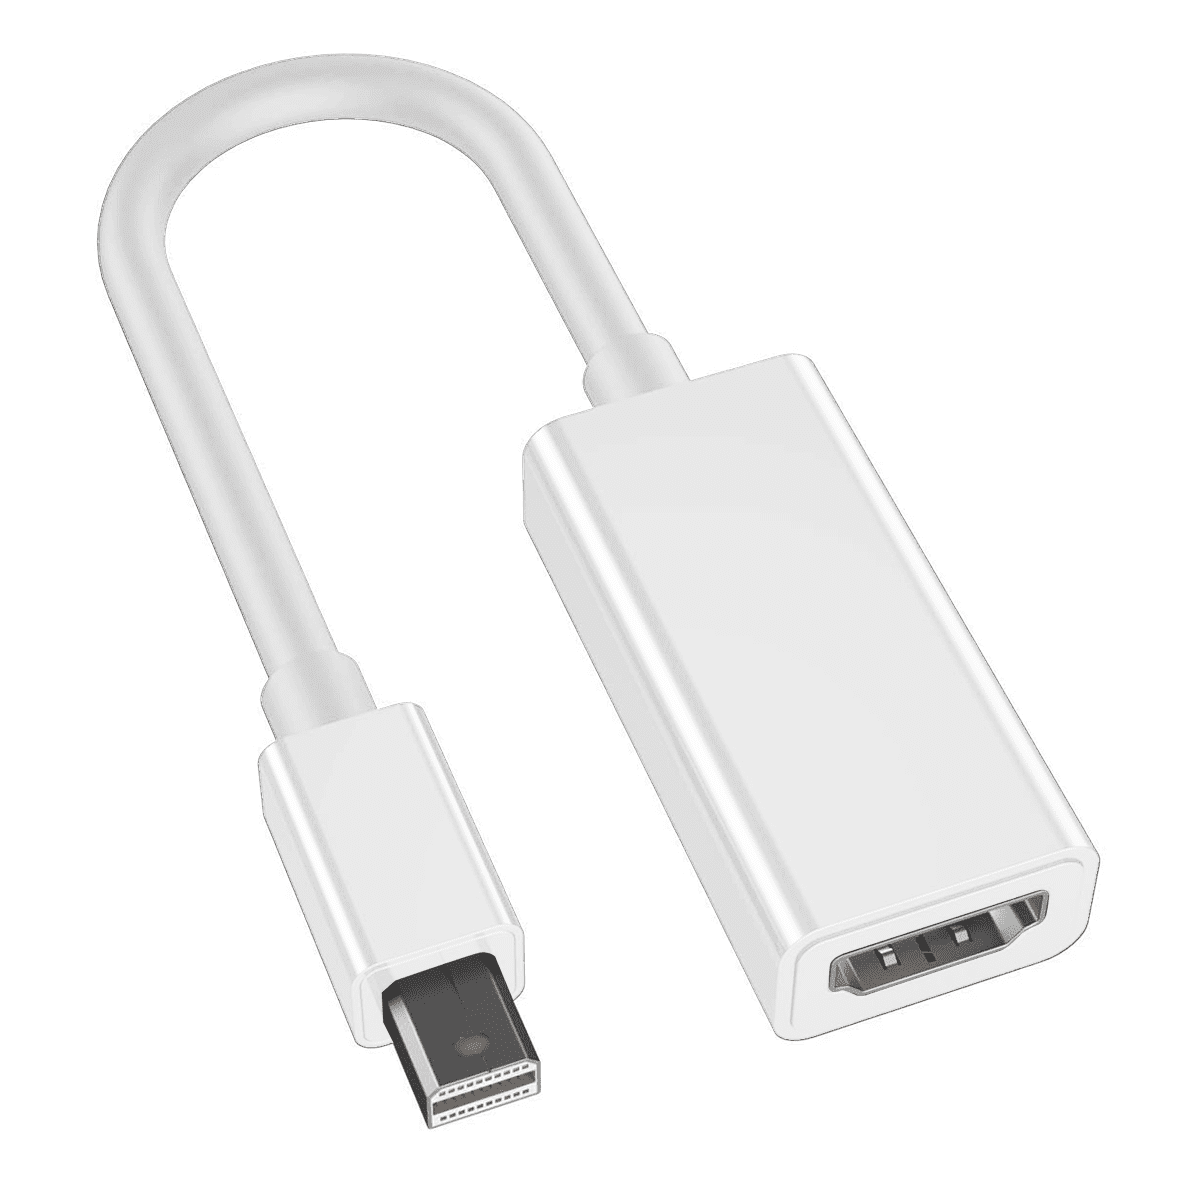 Produktion Walter Cunningham teater Mini DP To HDMI Adapter Converter for MacBook Air/Pro, Microsoft Surface  Pro 3/4, Mac Mini, Monitor, Projector Etc | Walmart Canada